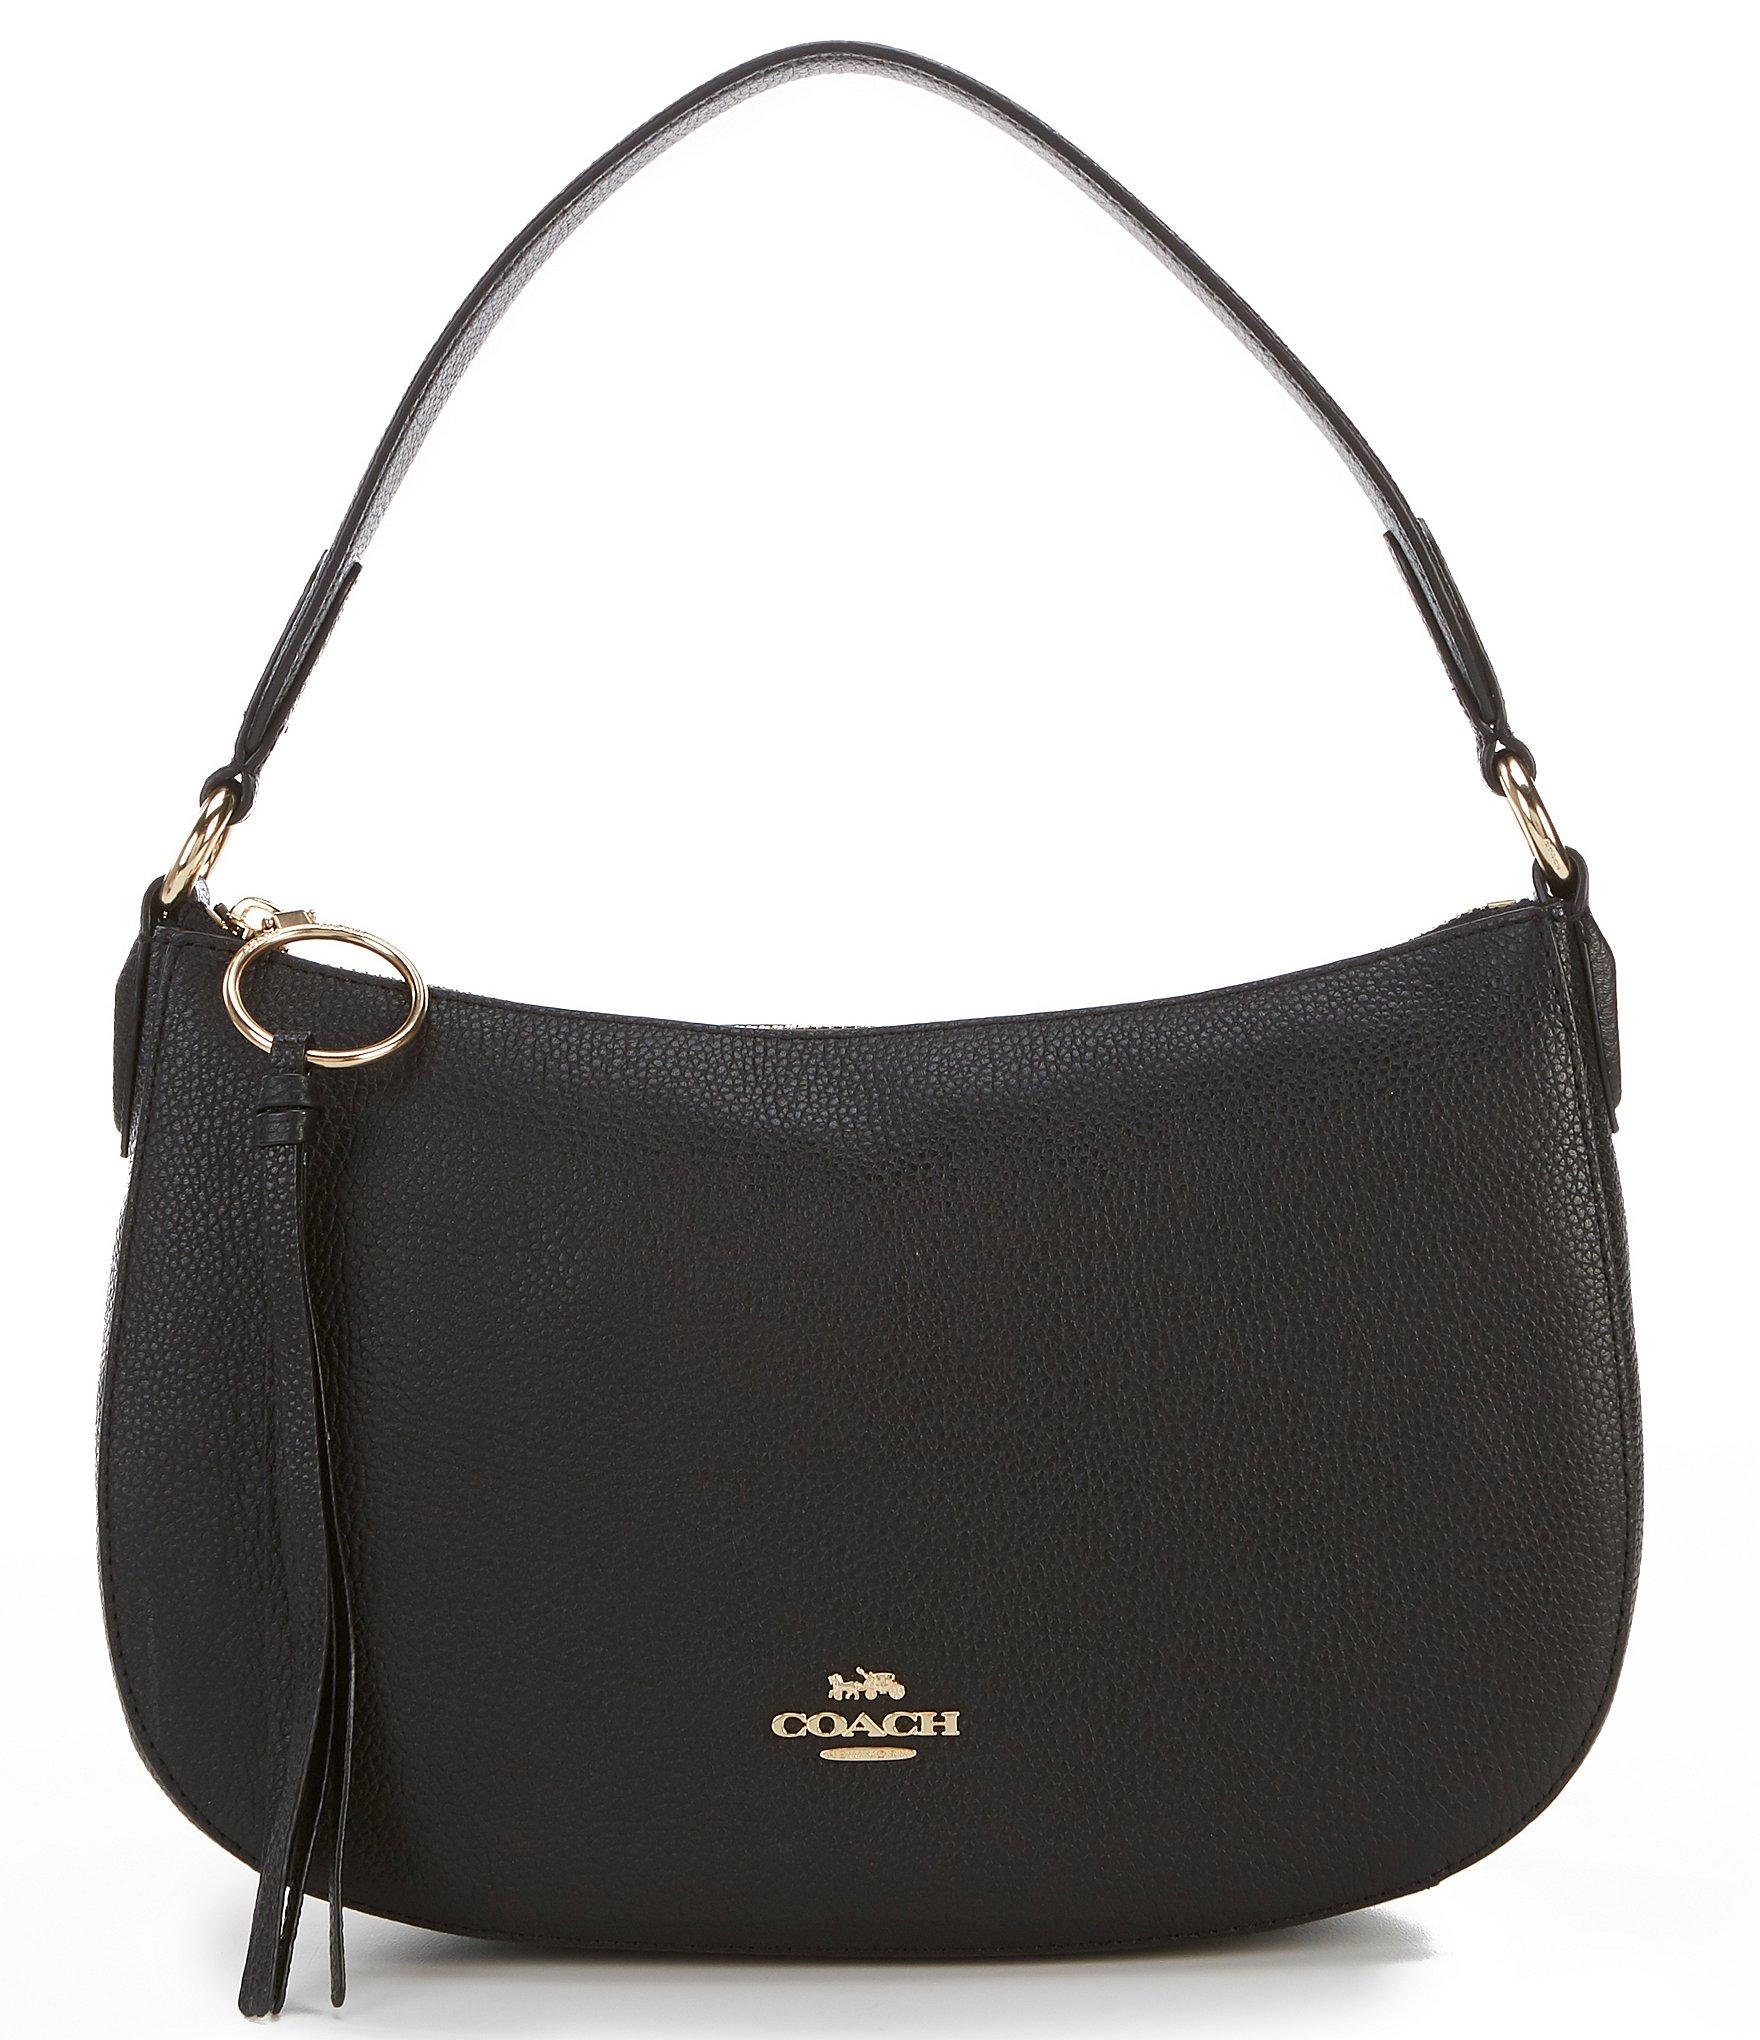 COACH Polished Pebble Leather Sutton Cross-body Bag in Black - Lyst